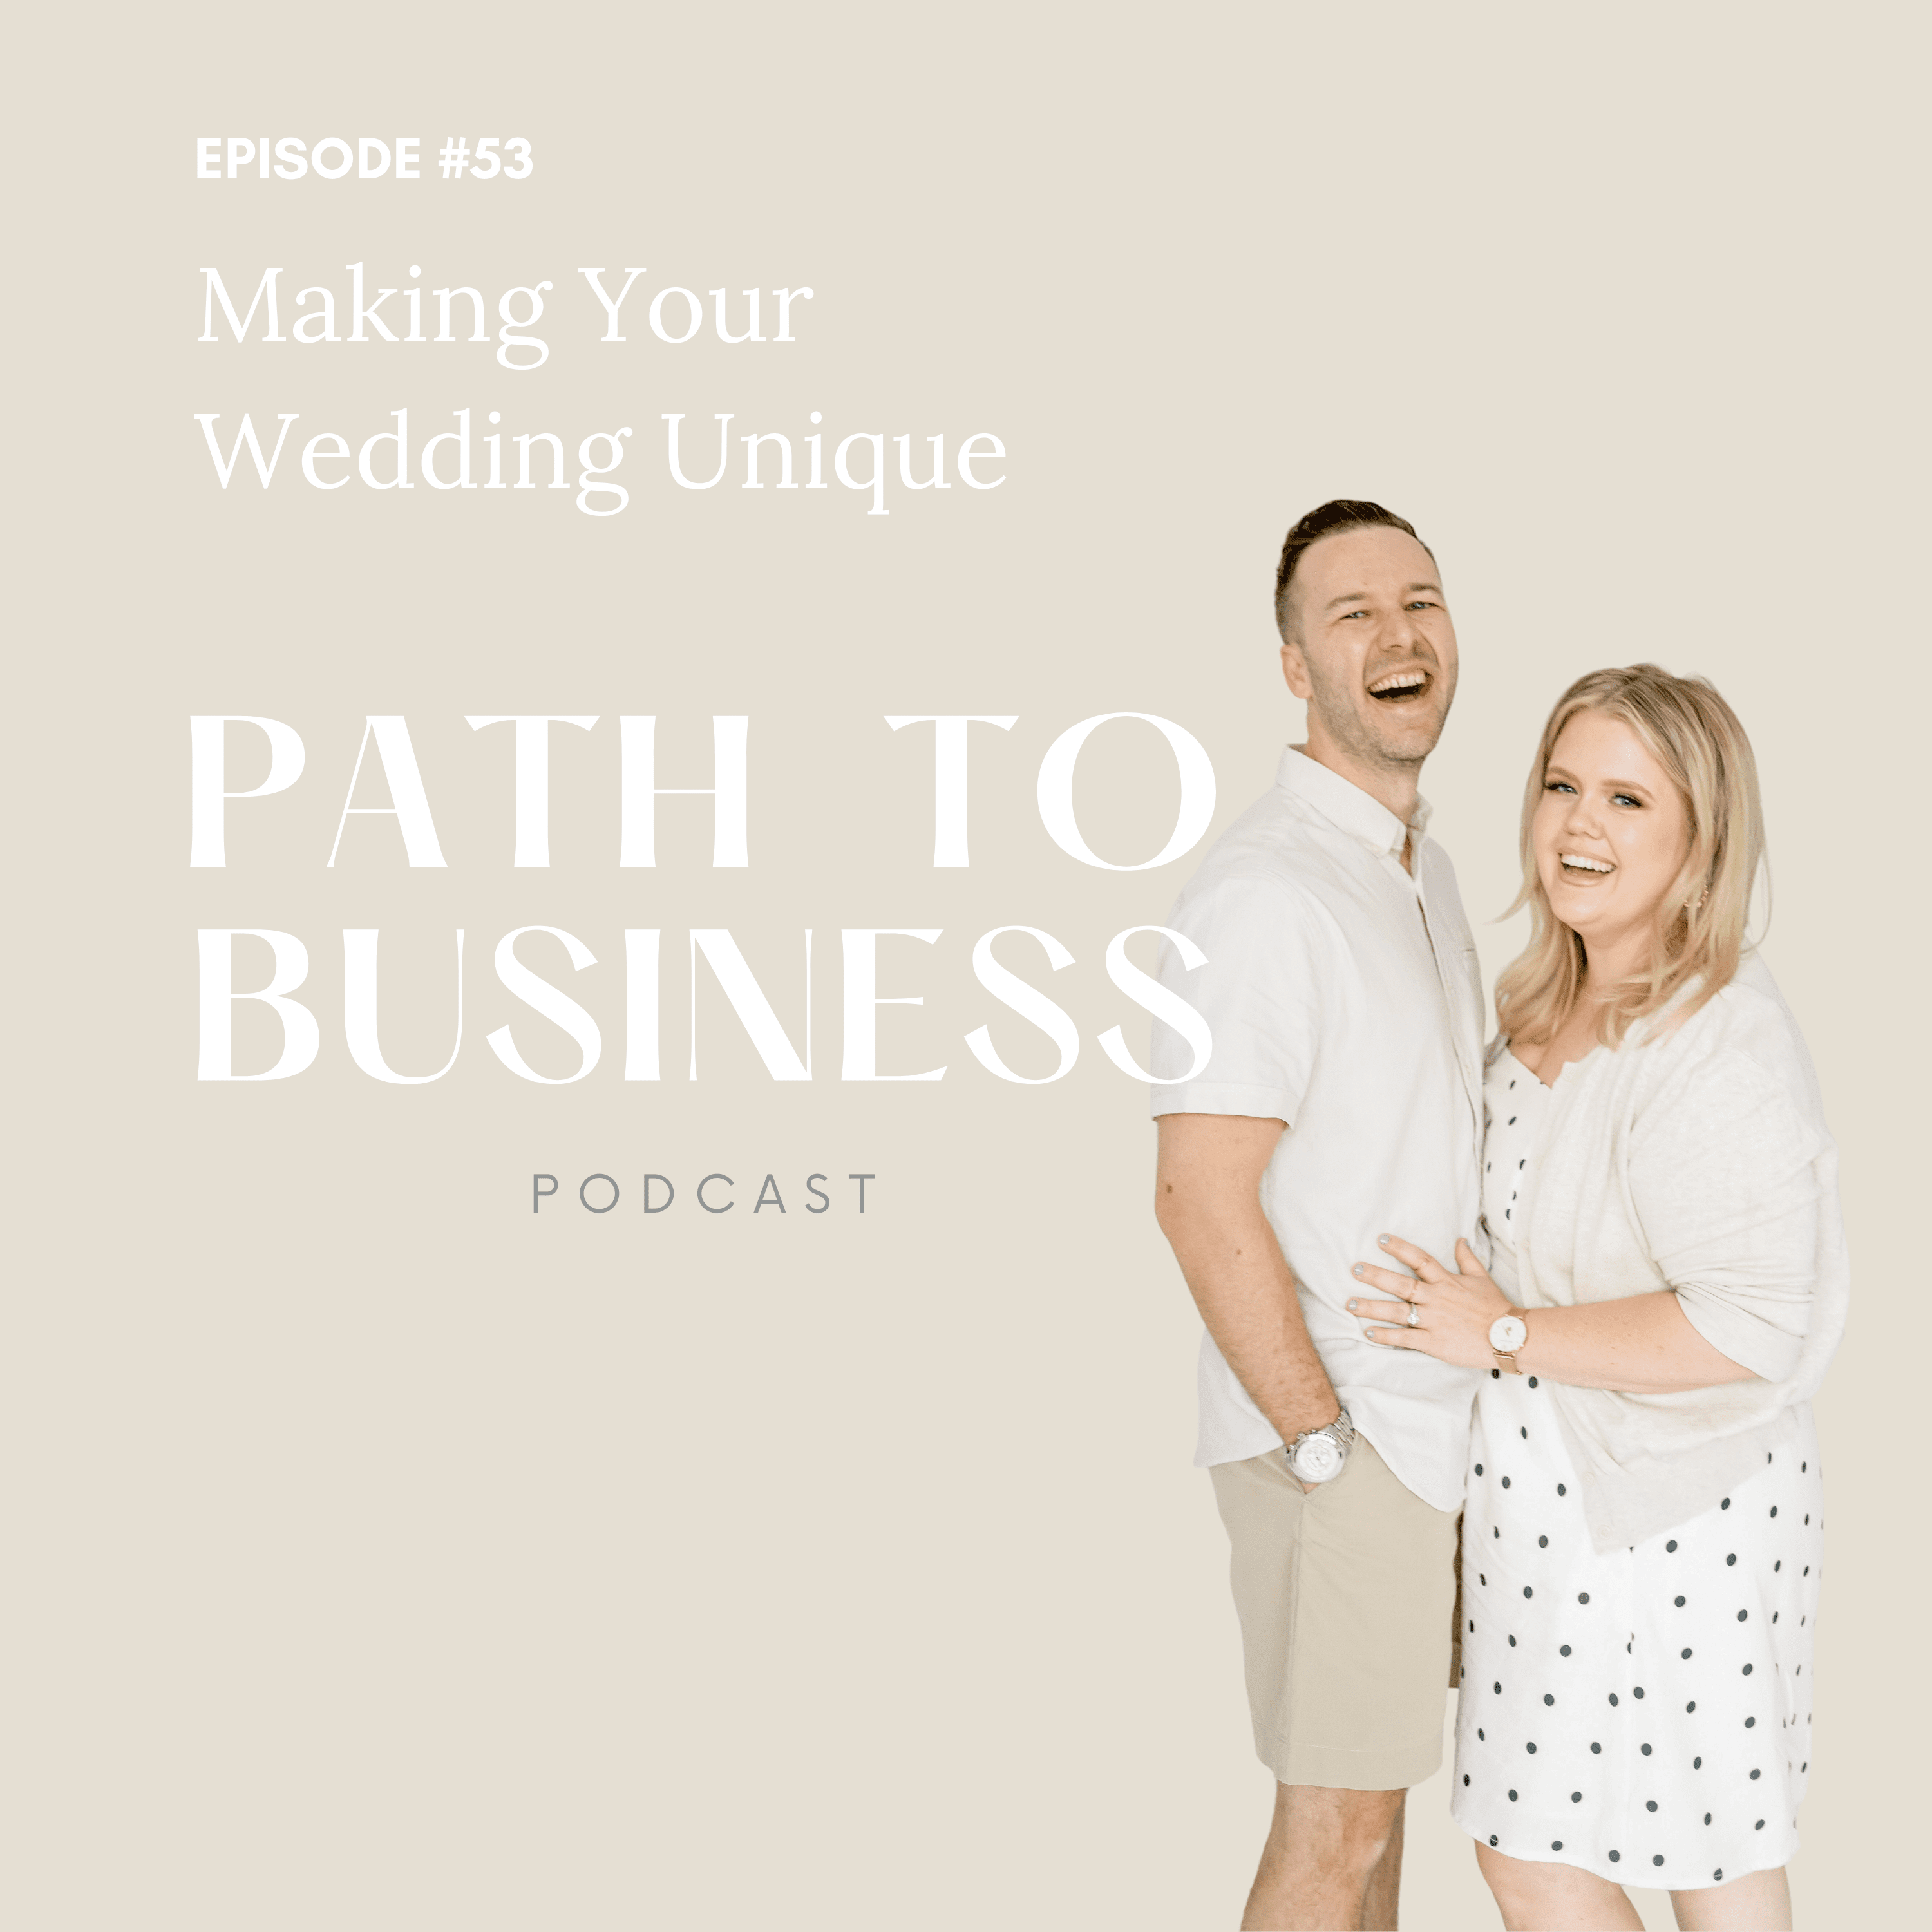 path to business podcast - making your wedding unique